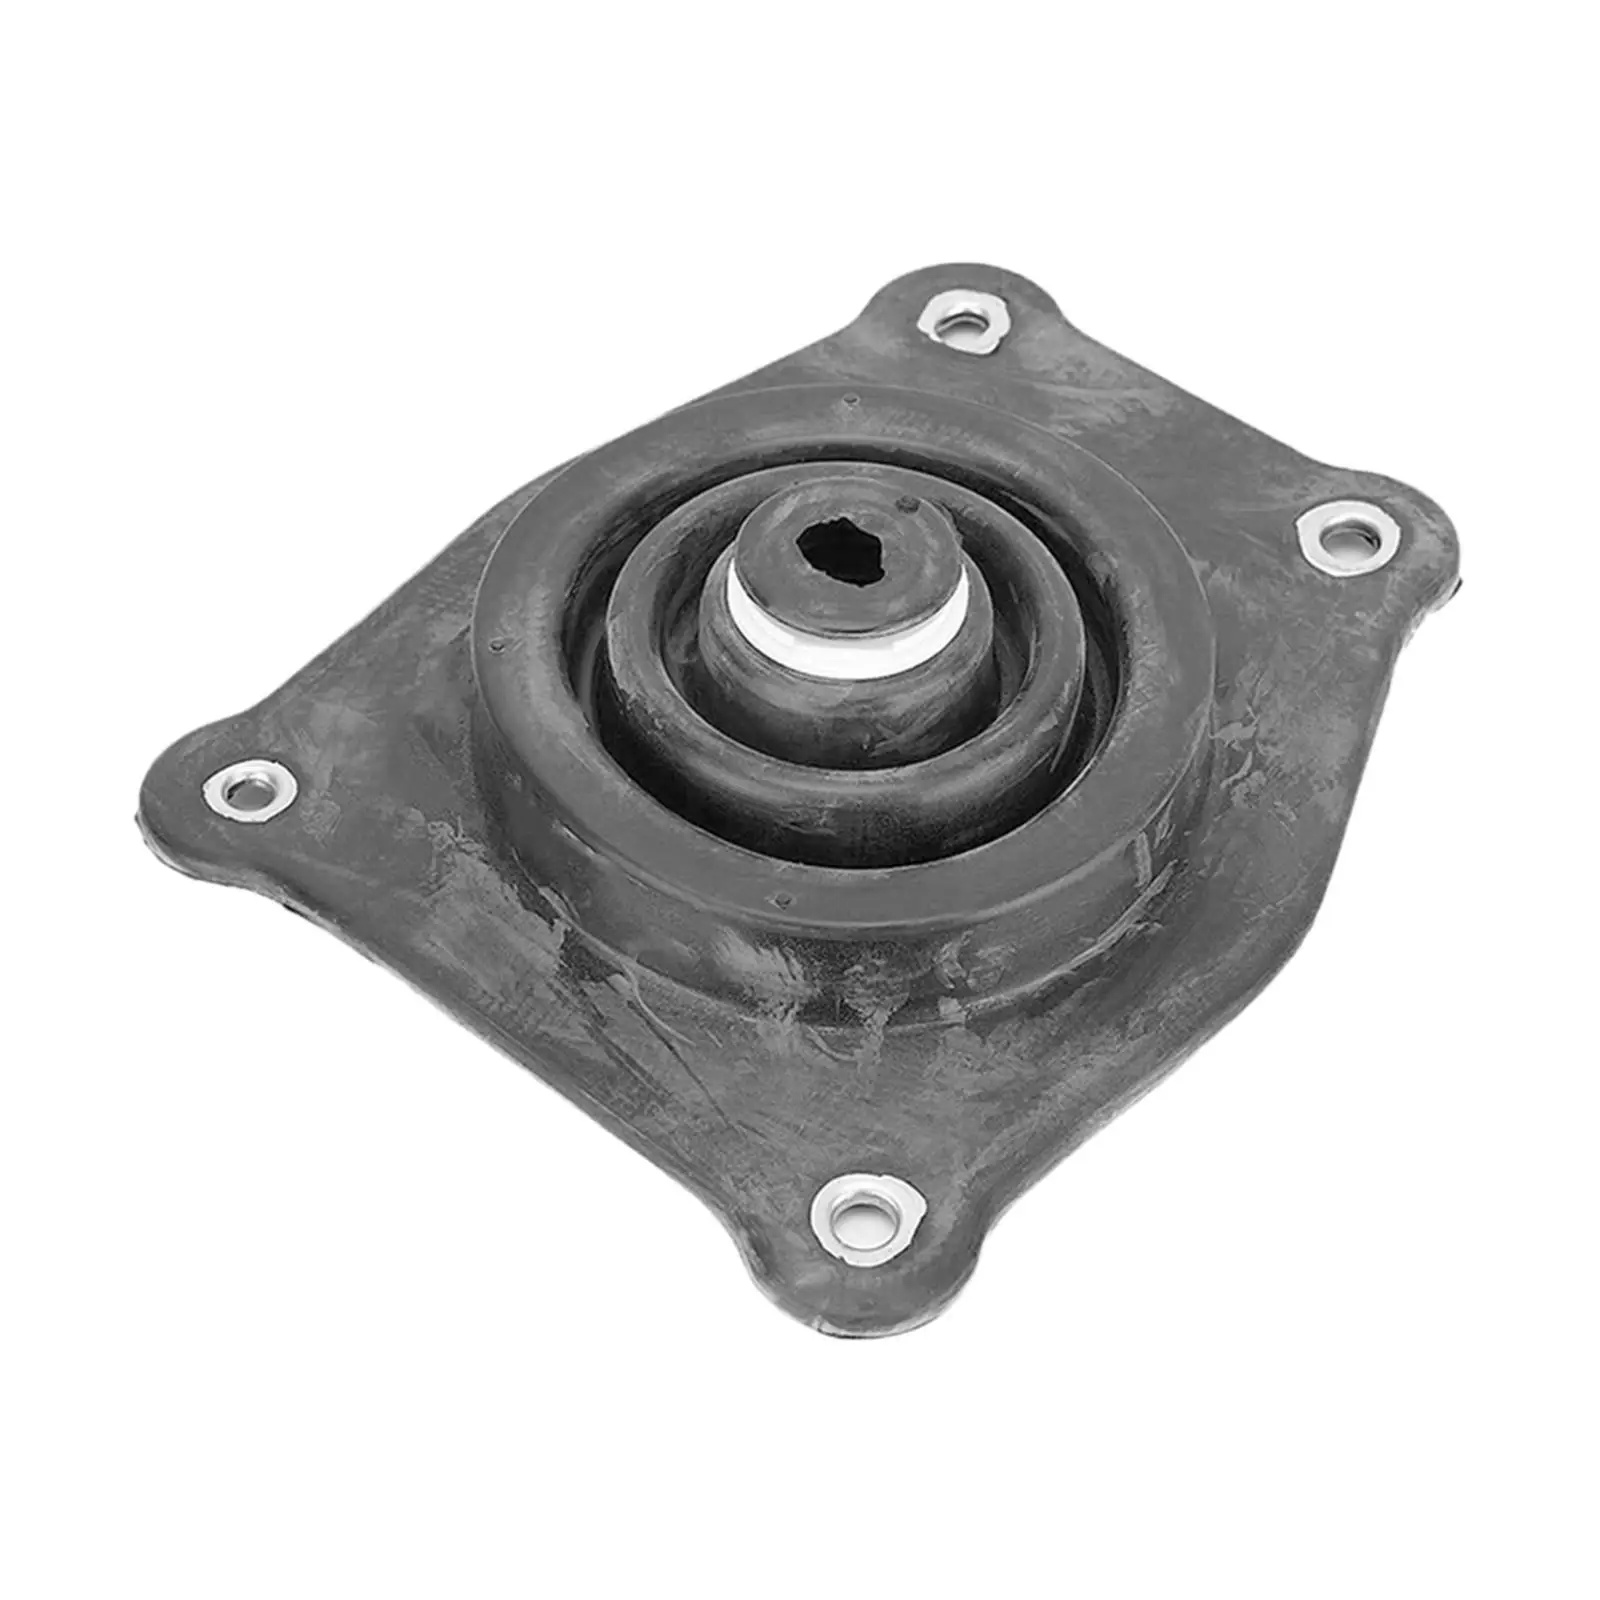  Boot  Insulator Rubber Transmission Gear er Cover  NA0164481B Accessories Replaces for  